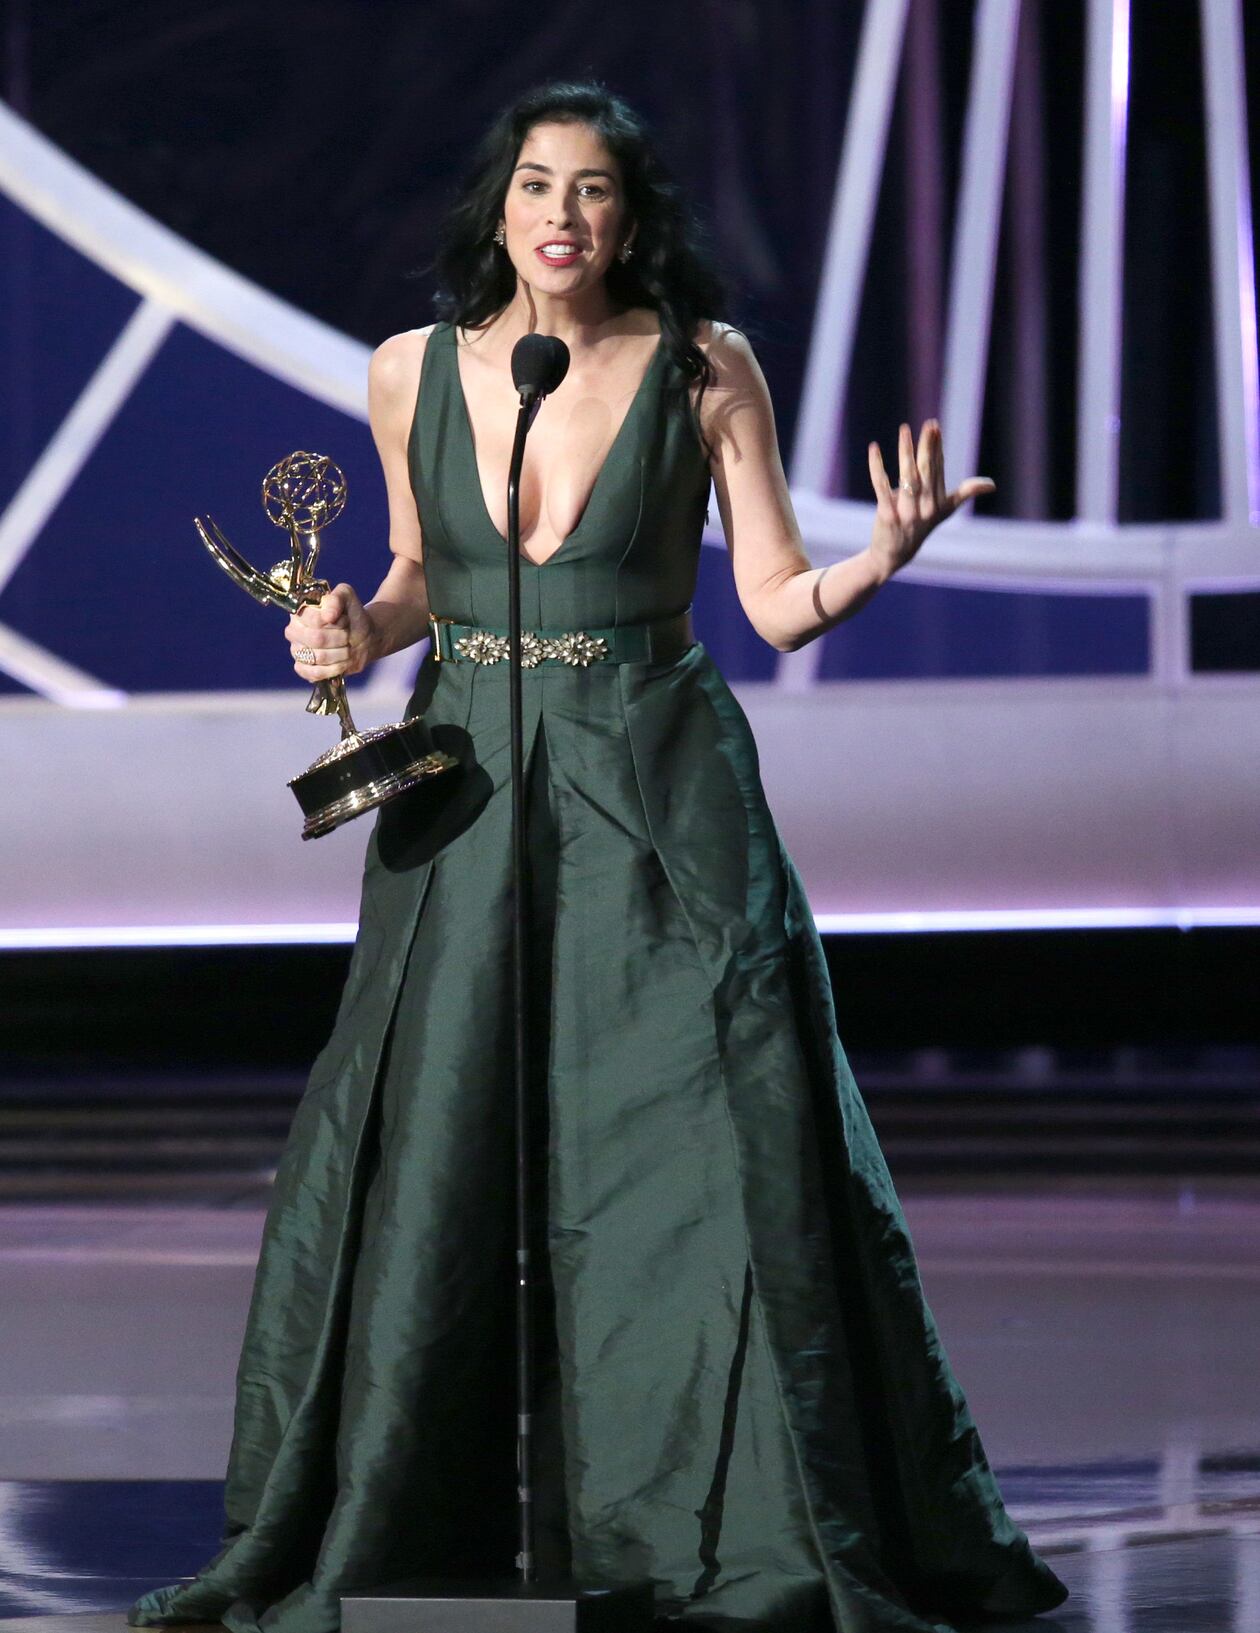 The Primetime Emmy Awards Emmys 2014 MustSee Moments Photo 1818396